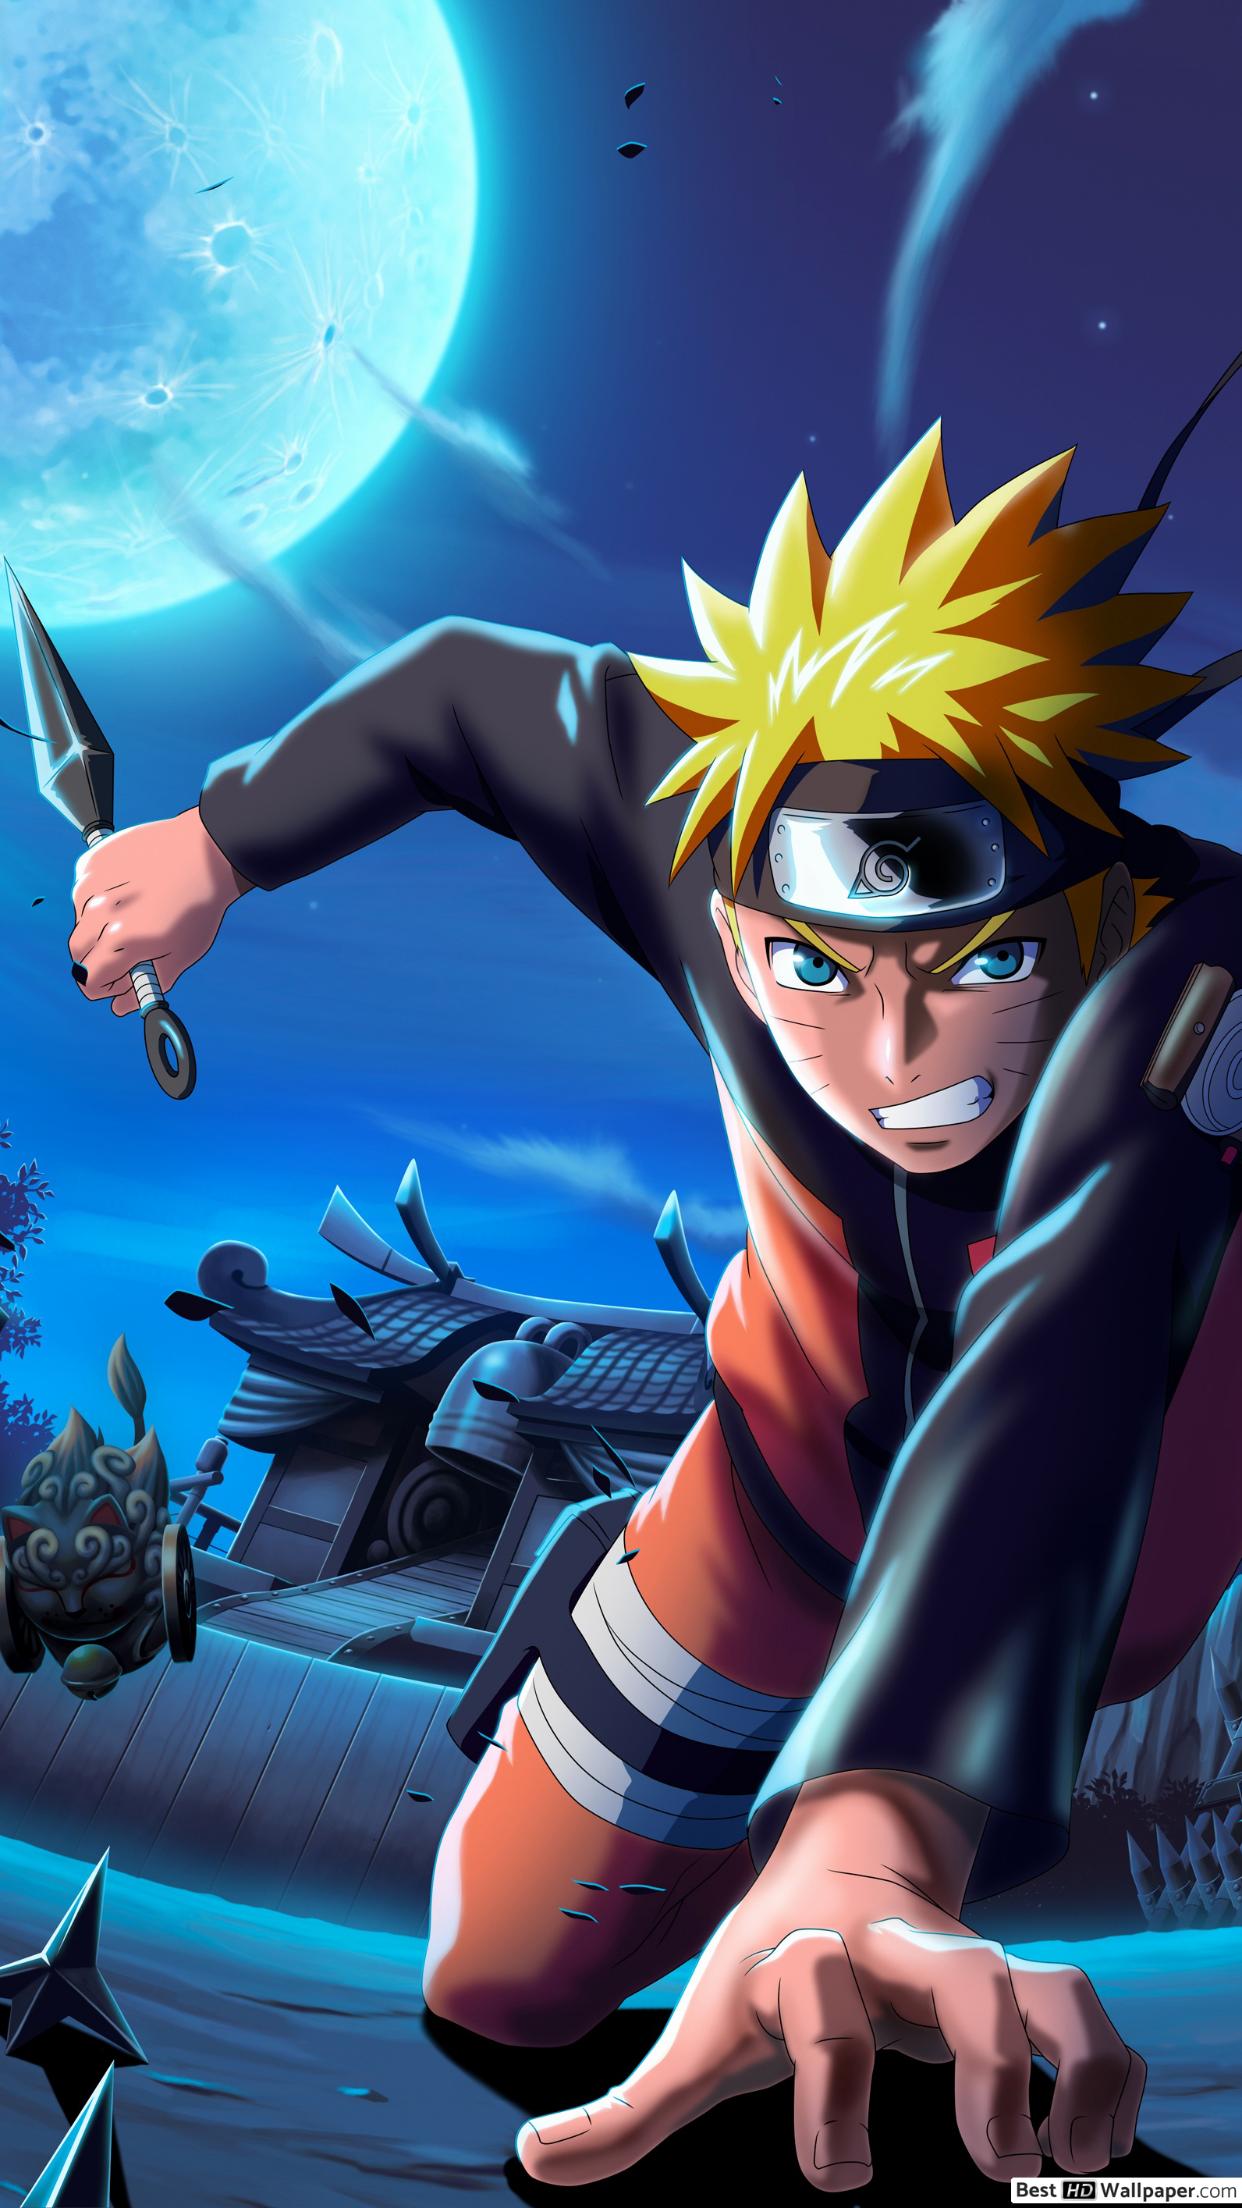 15 Awesome Naruto Wallpapers for iPhones 2023 FHD